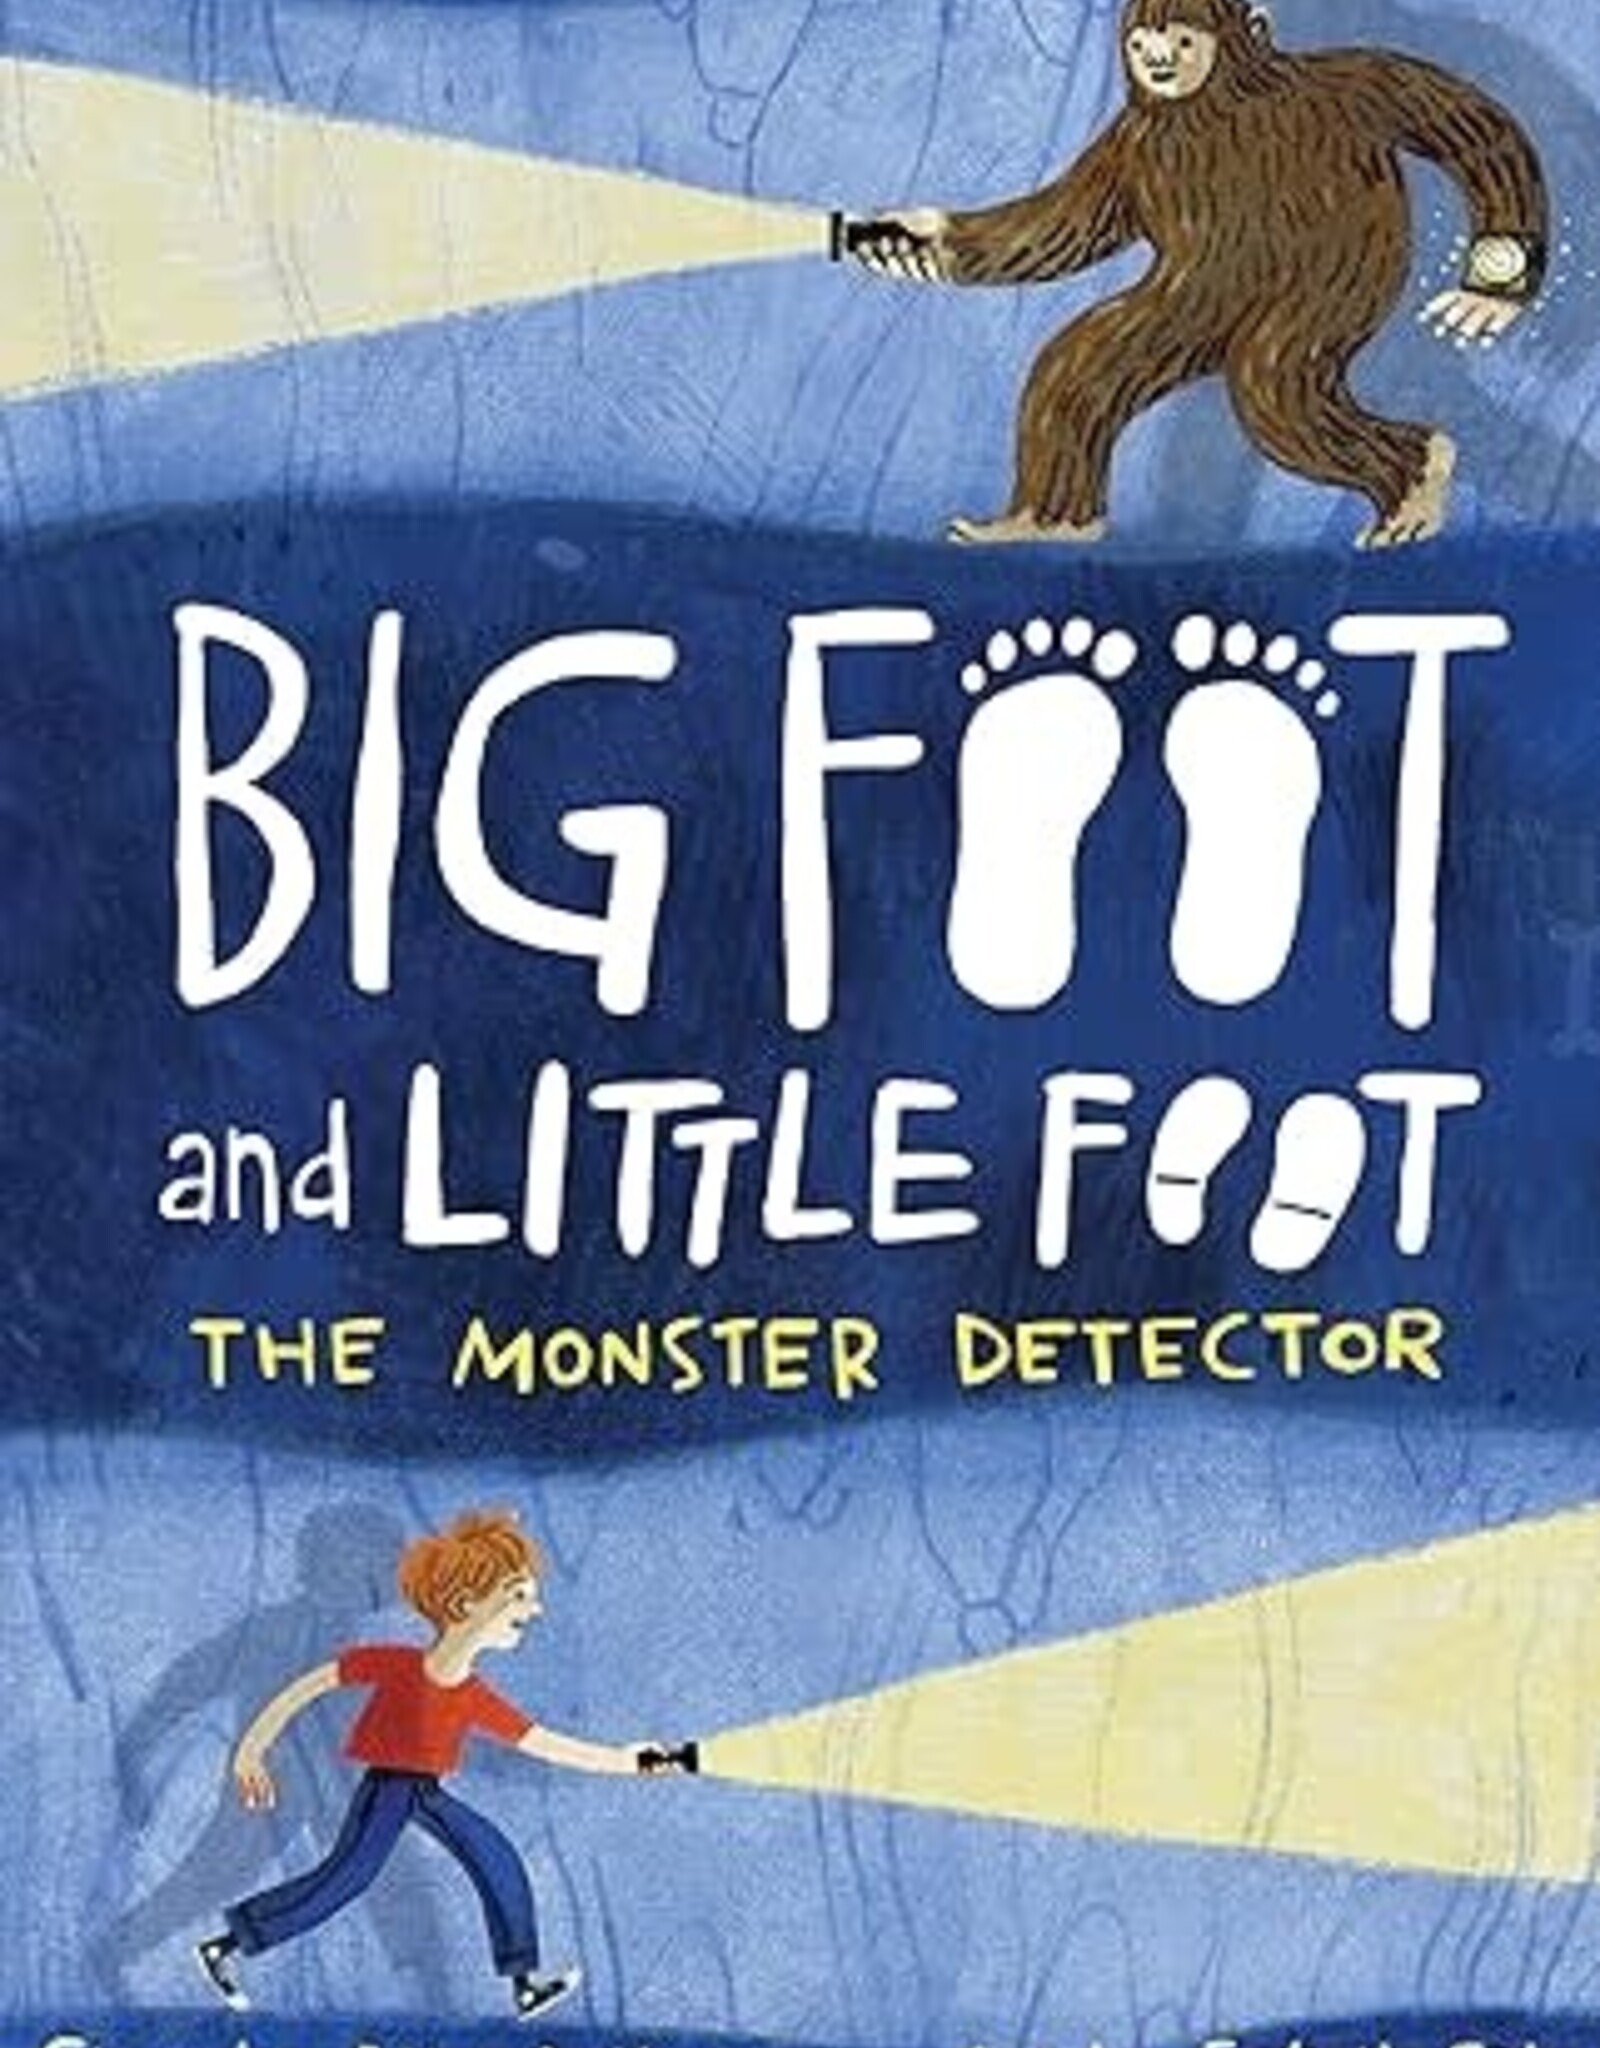 Big Foot and Little Foot #2